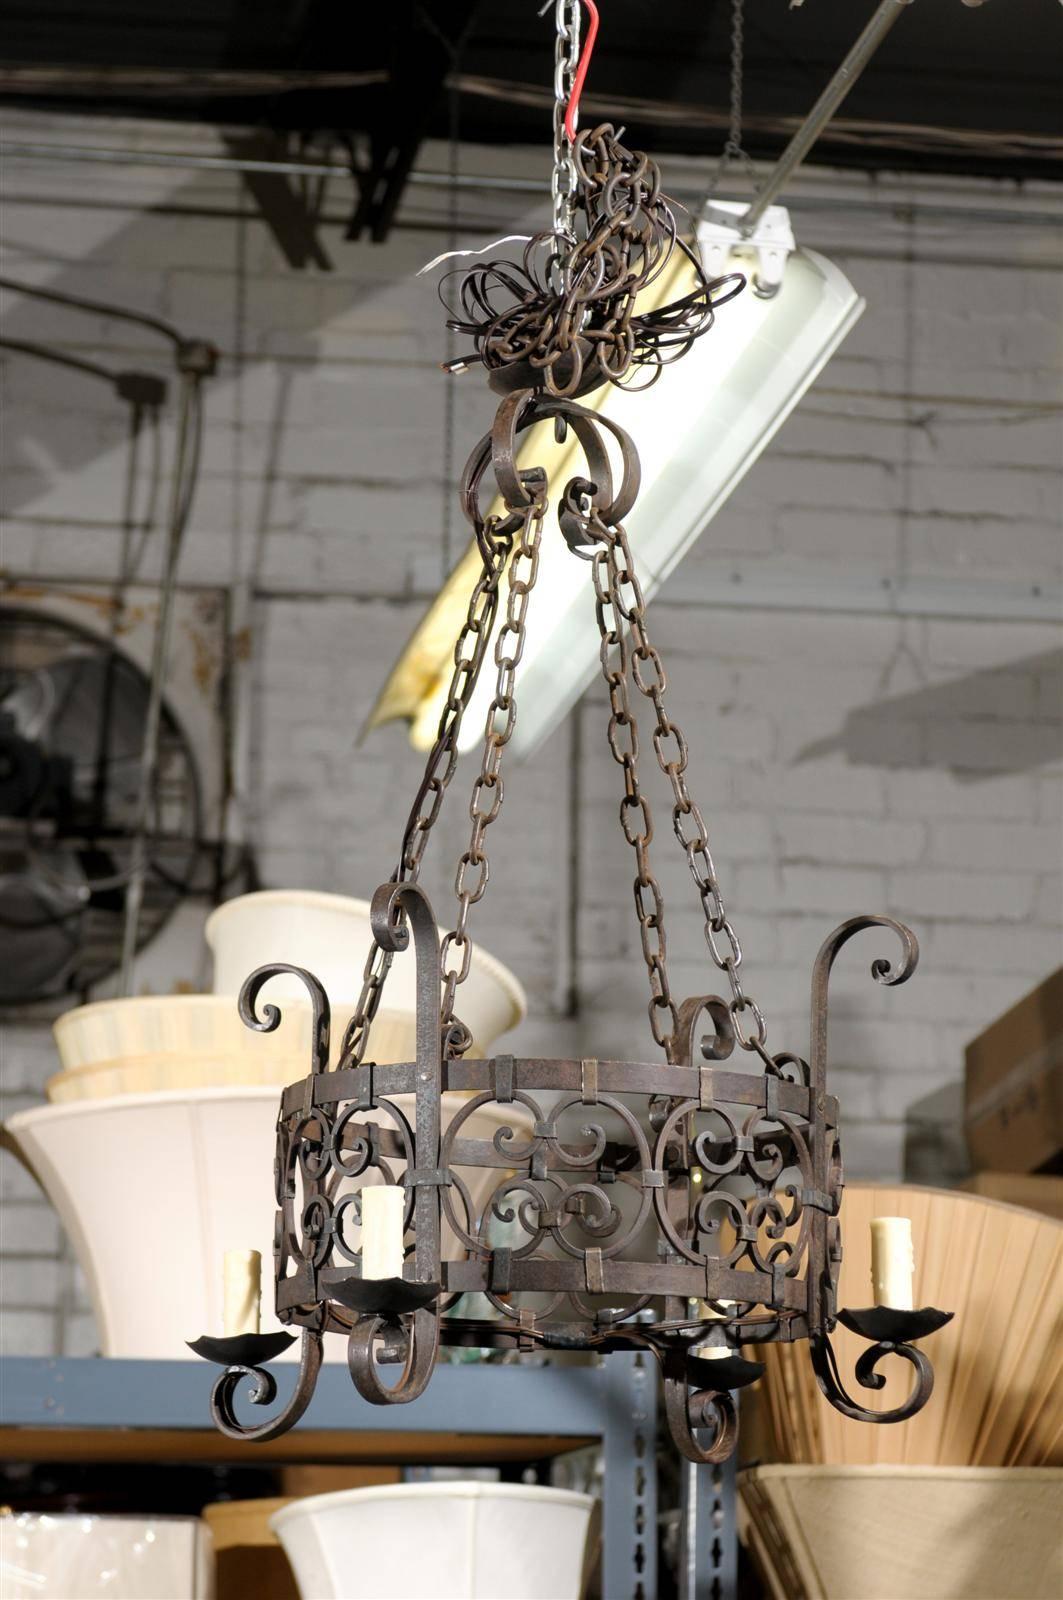 Vintage Wrought Iron Four Light Chandelier, circa 1950
For a small space, this wonderful chandelier would be very charming.  It has four lights and has been rewired.  Original chain and top piece are included.  It is ready to hang.  